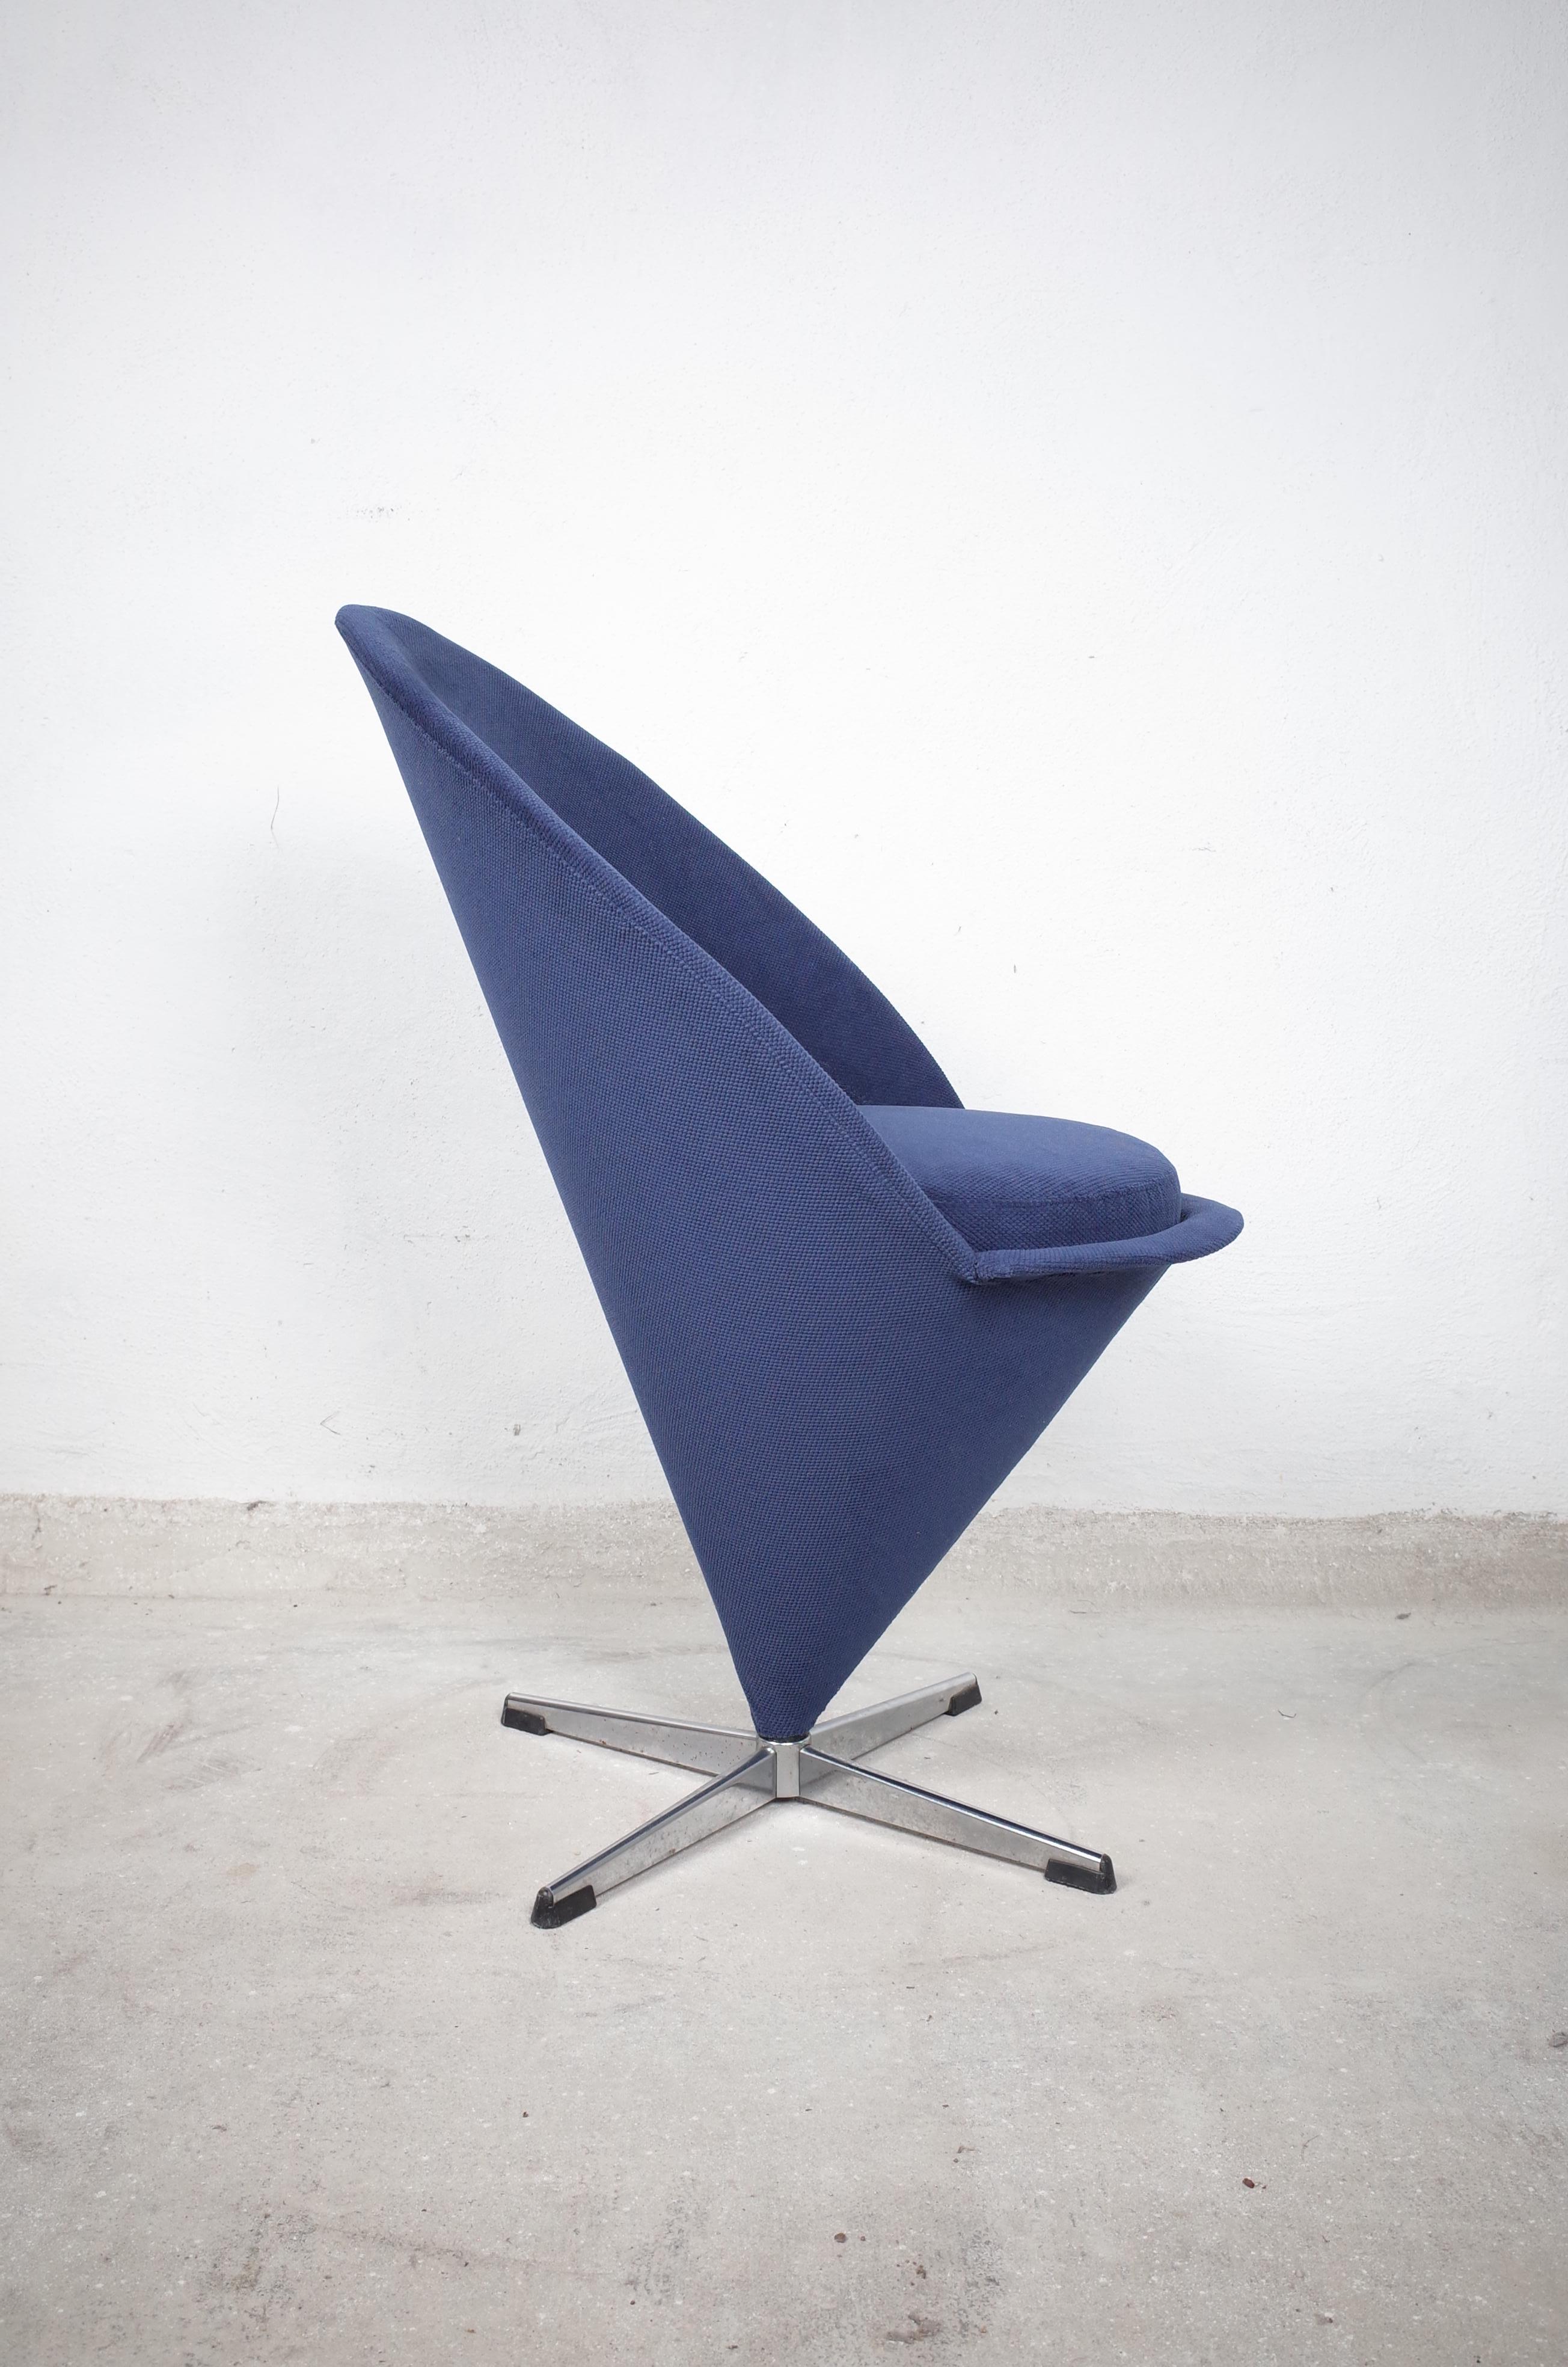 Mid-20th Century Midcentury Blue Cone Chair by Verner Panton, 1960s For Sale